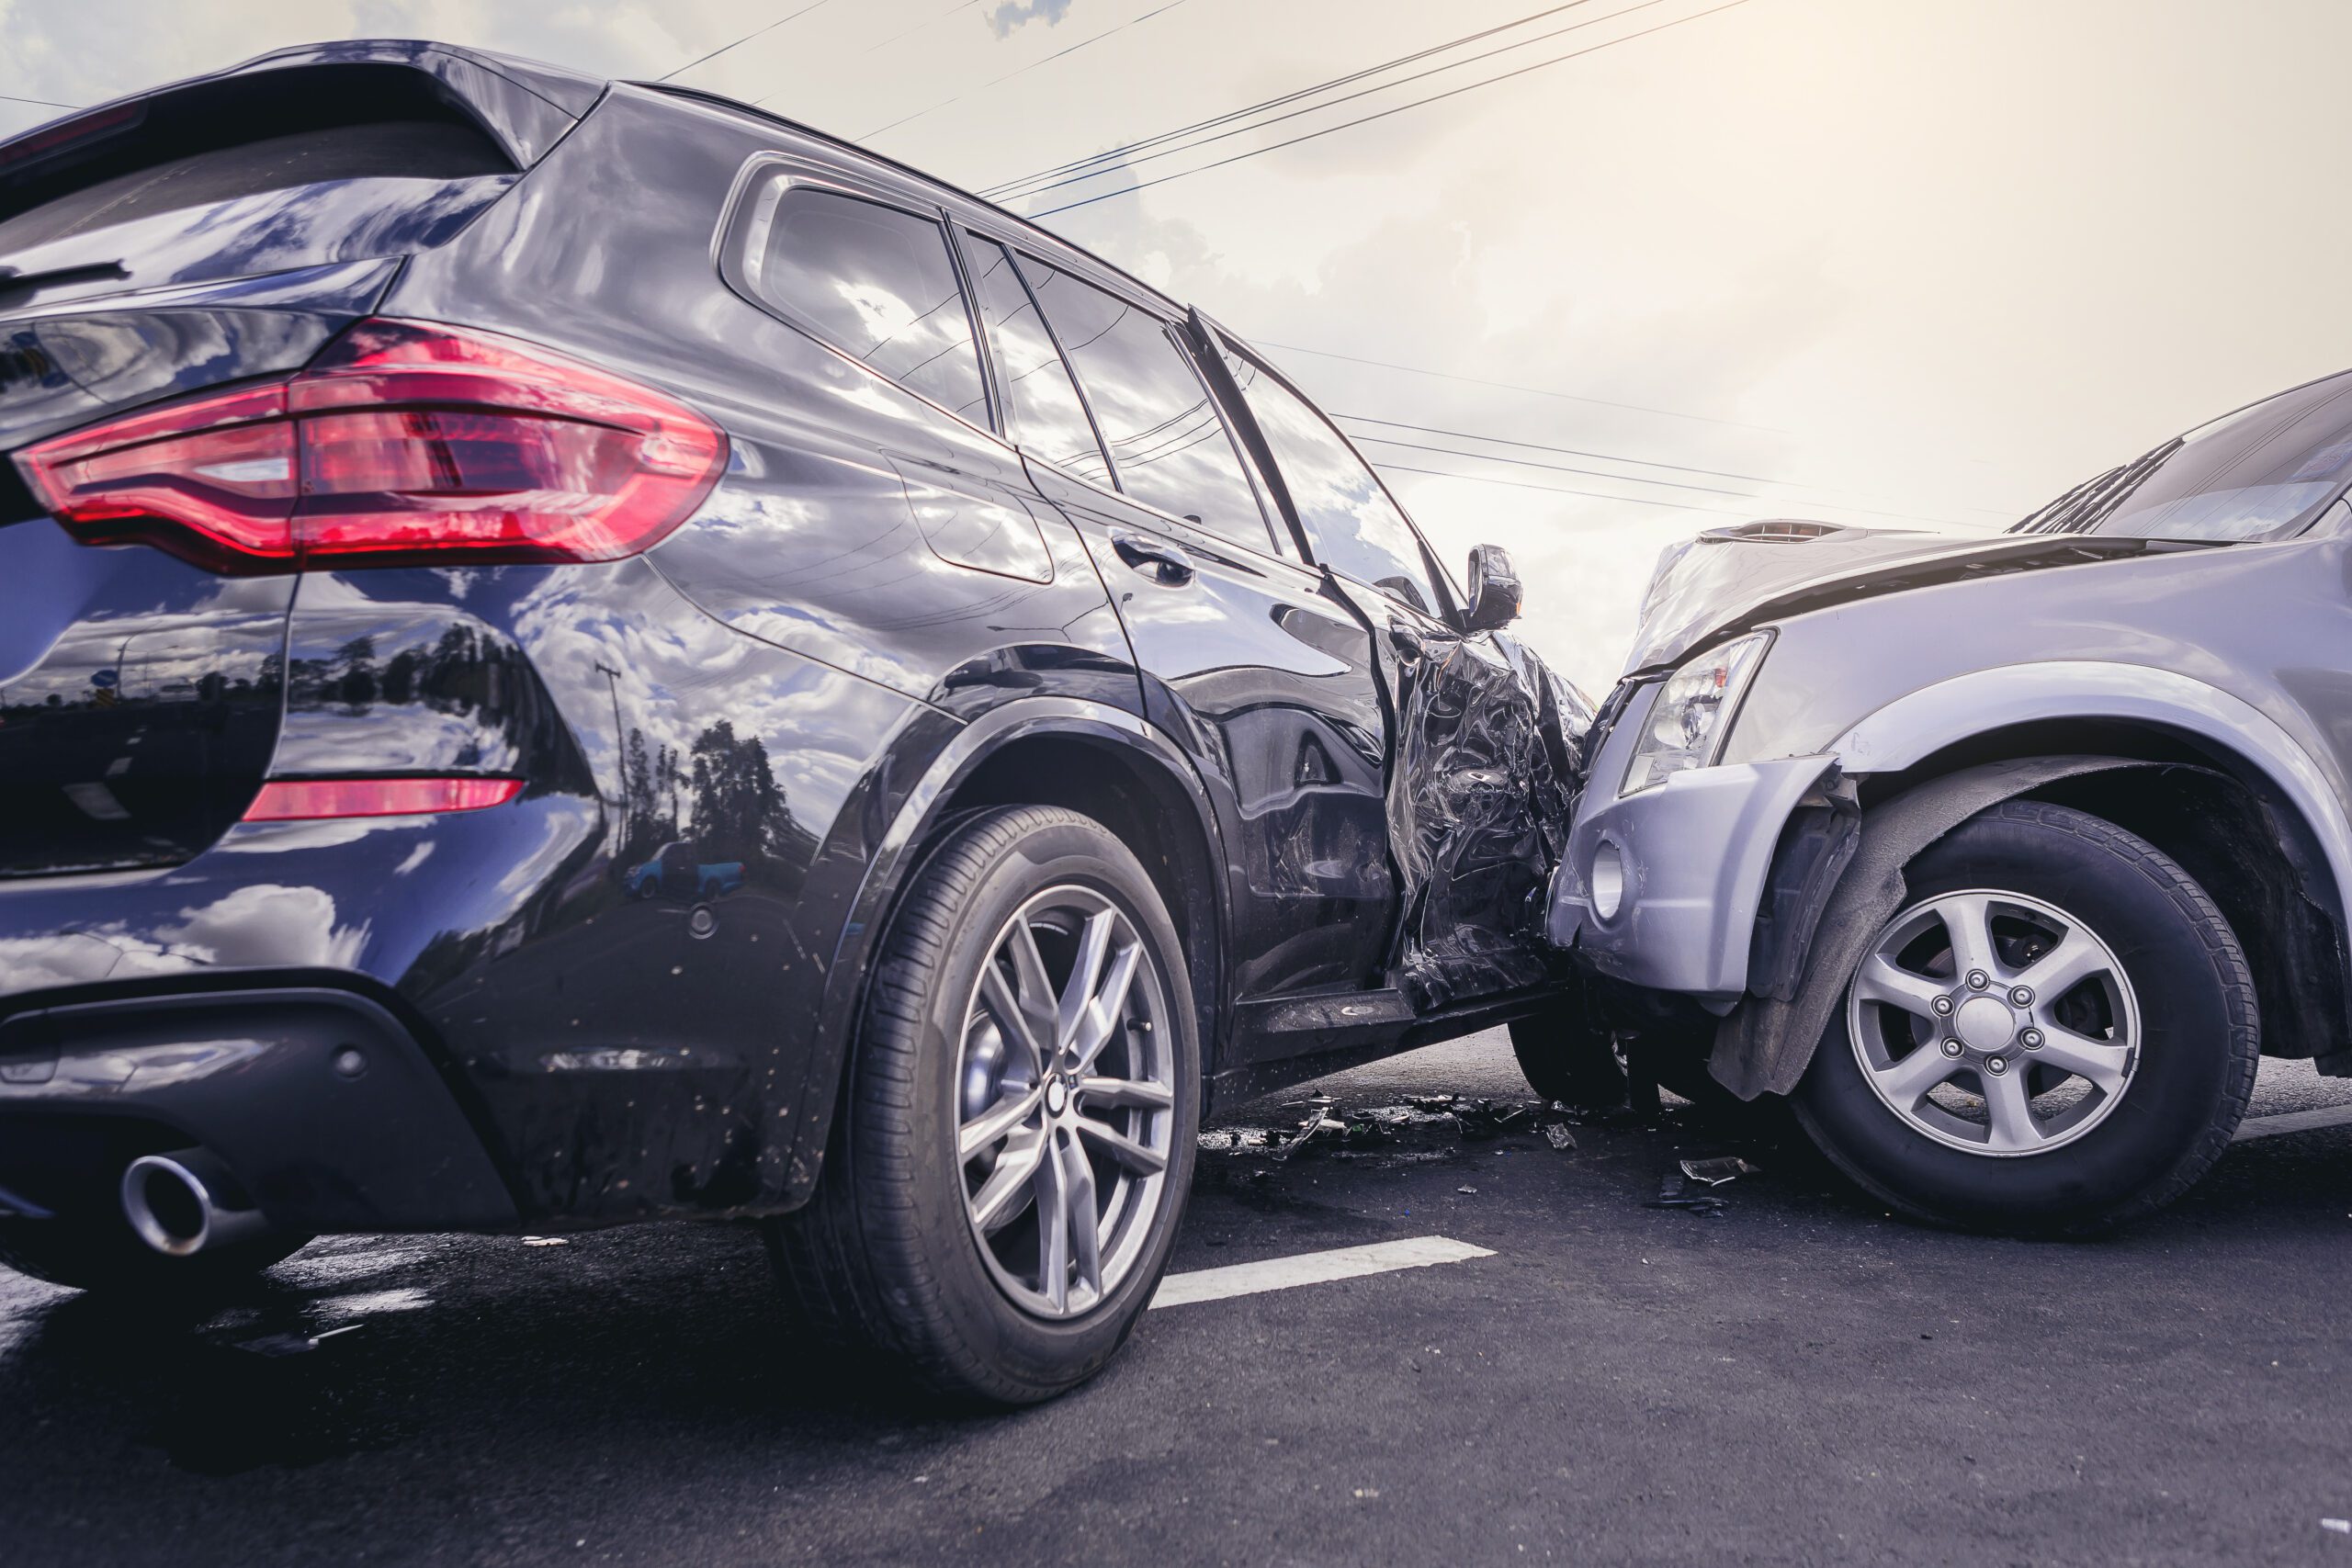 An image of a car accident between a black SUV and a gray car.